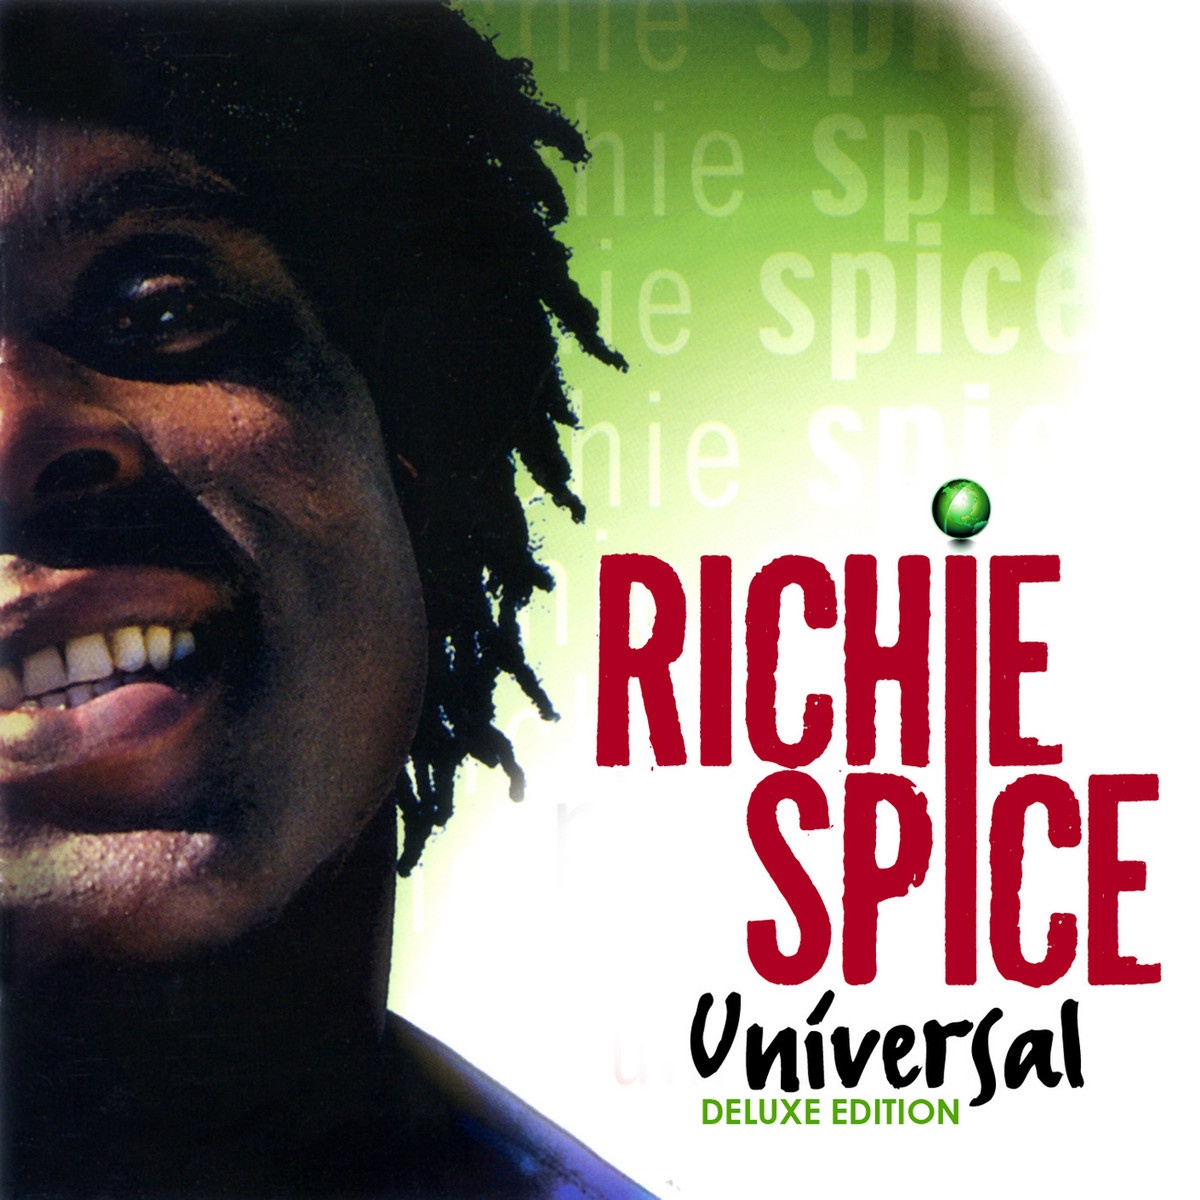 Universal (Deluxe Edition)